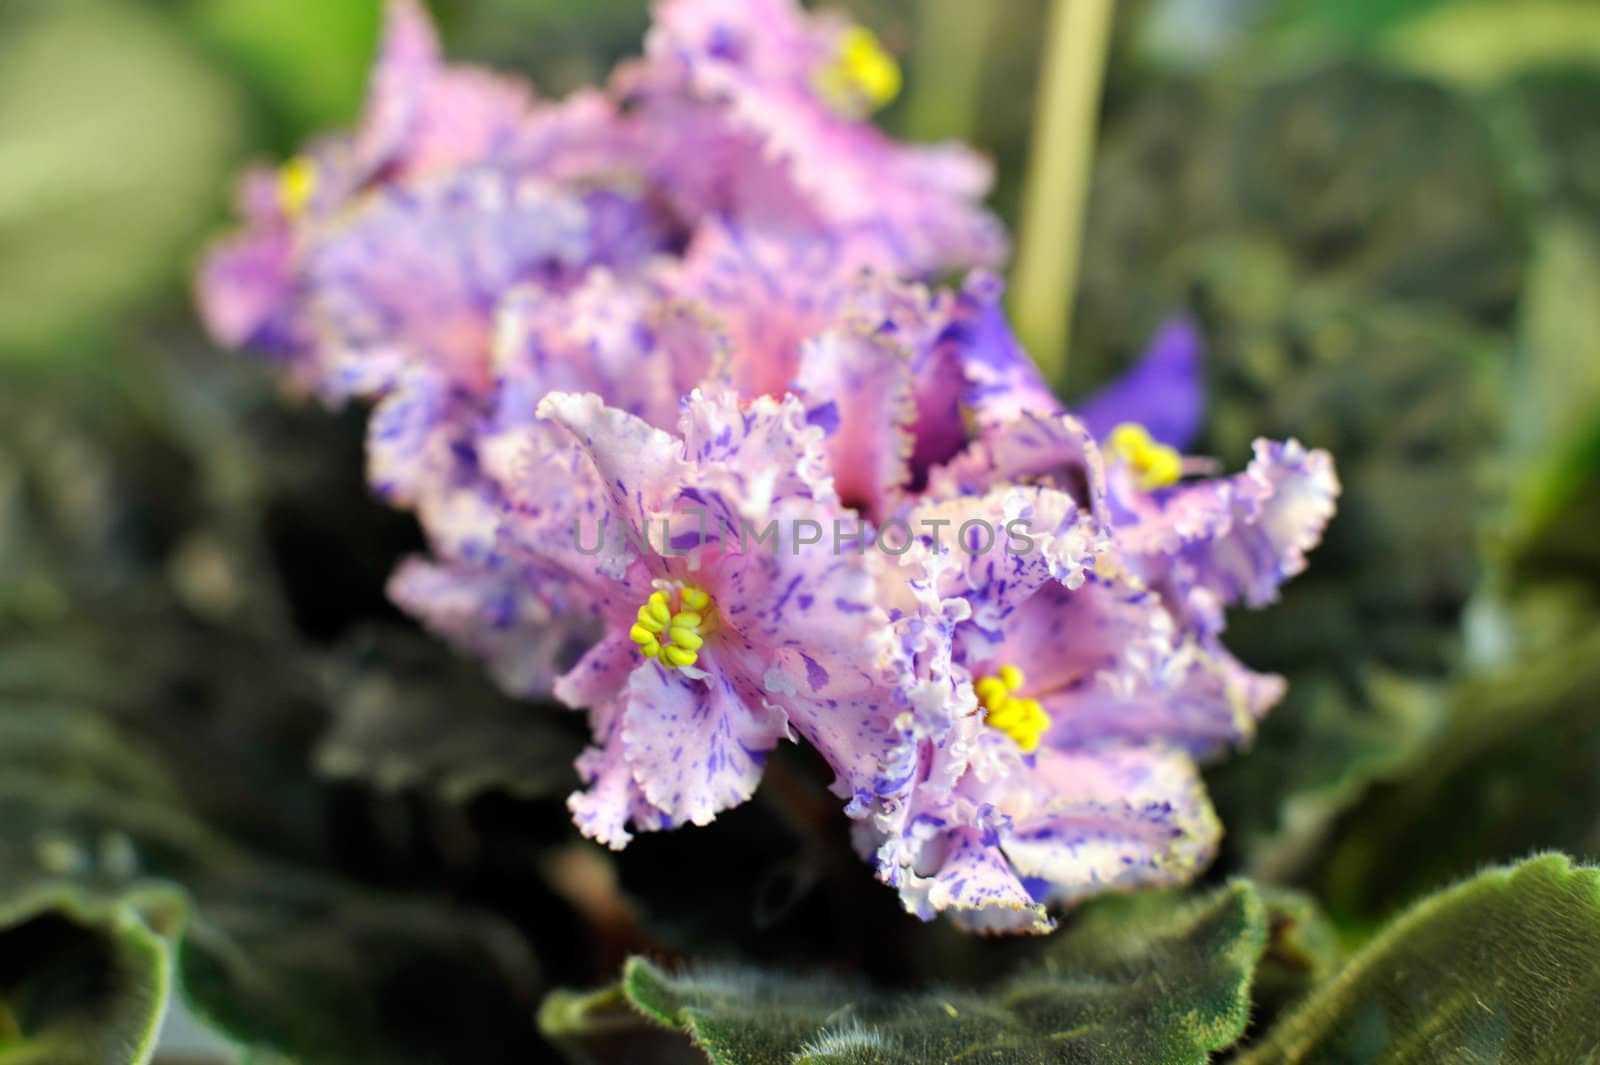 Saintpaulia, commonly known as African violet